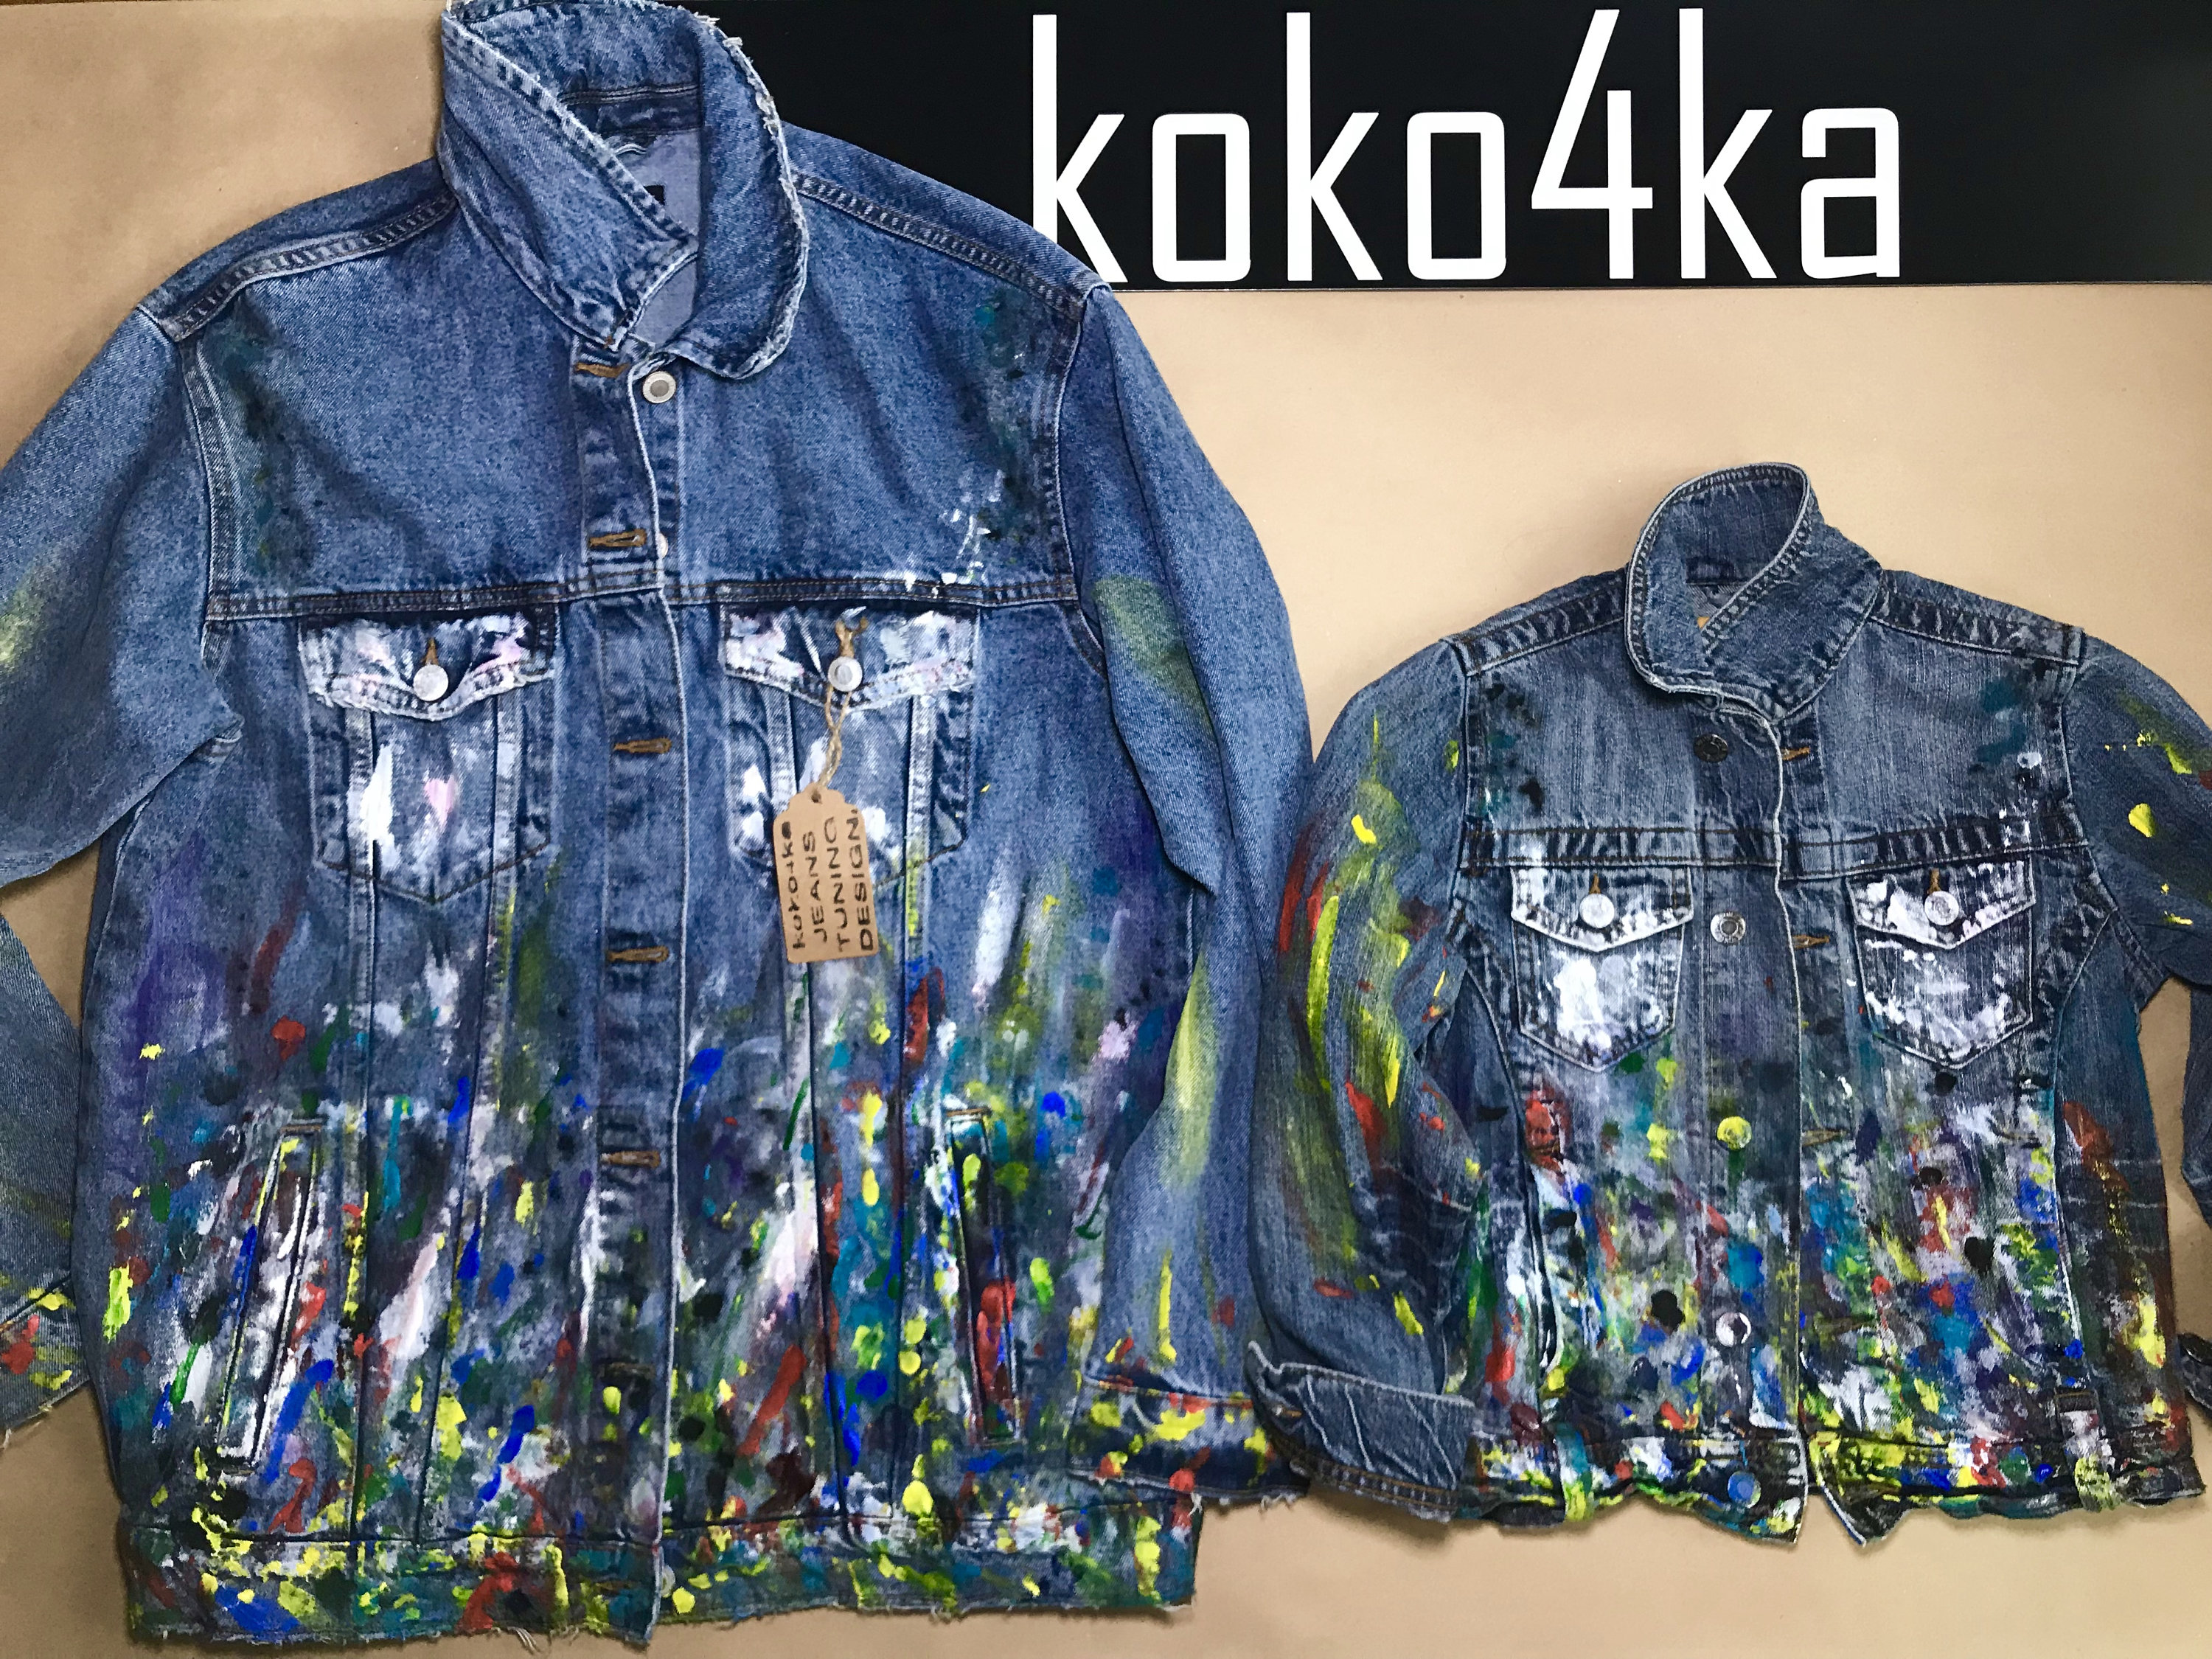 Hand Painted Denim Jacket With Painting Jacket With Art Work on It Art on Denim  Denim Jean Jacket With Art Pop-art Family Look Dad and Child - Etsy Israel